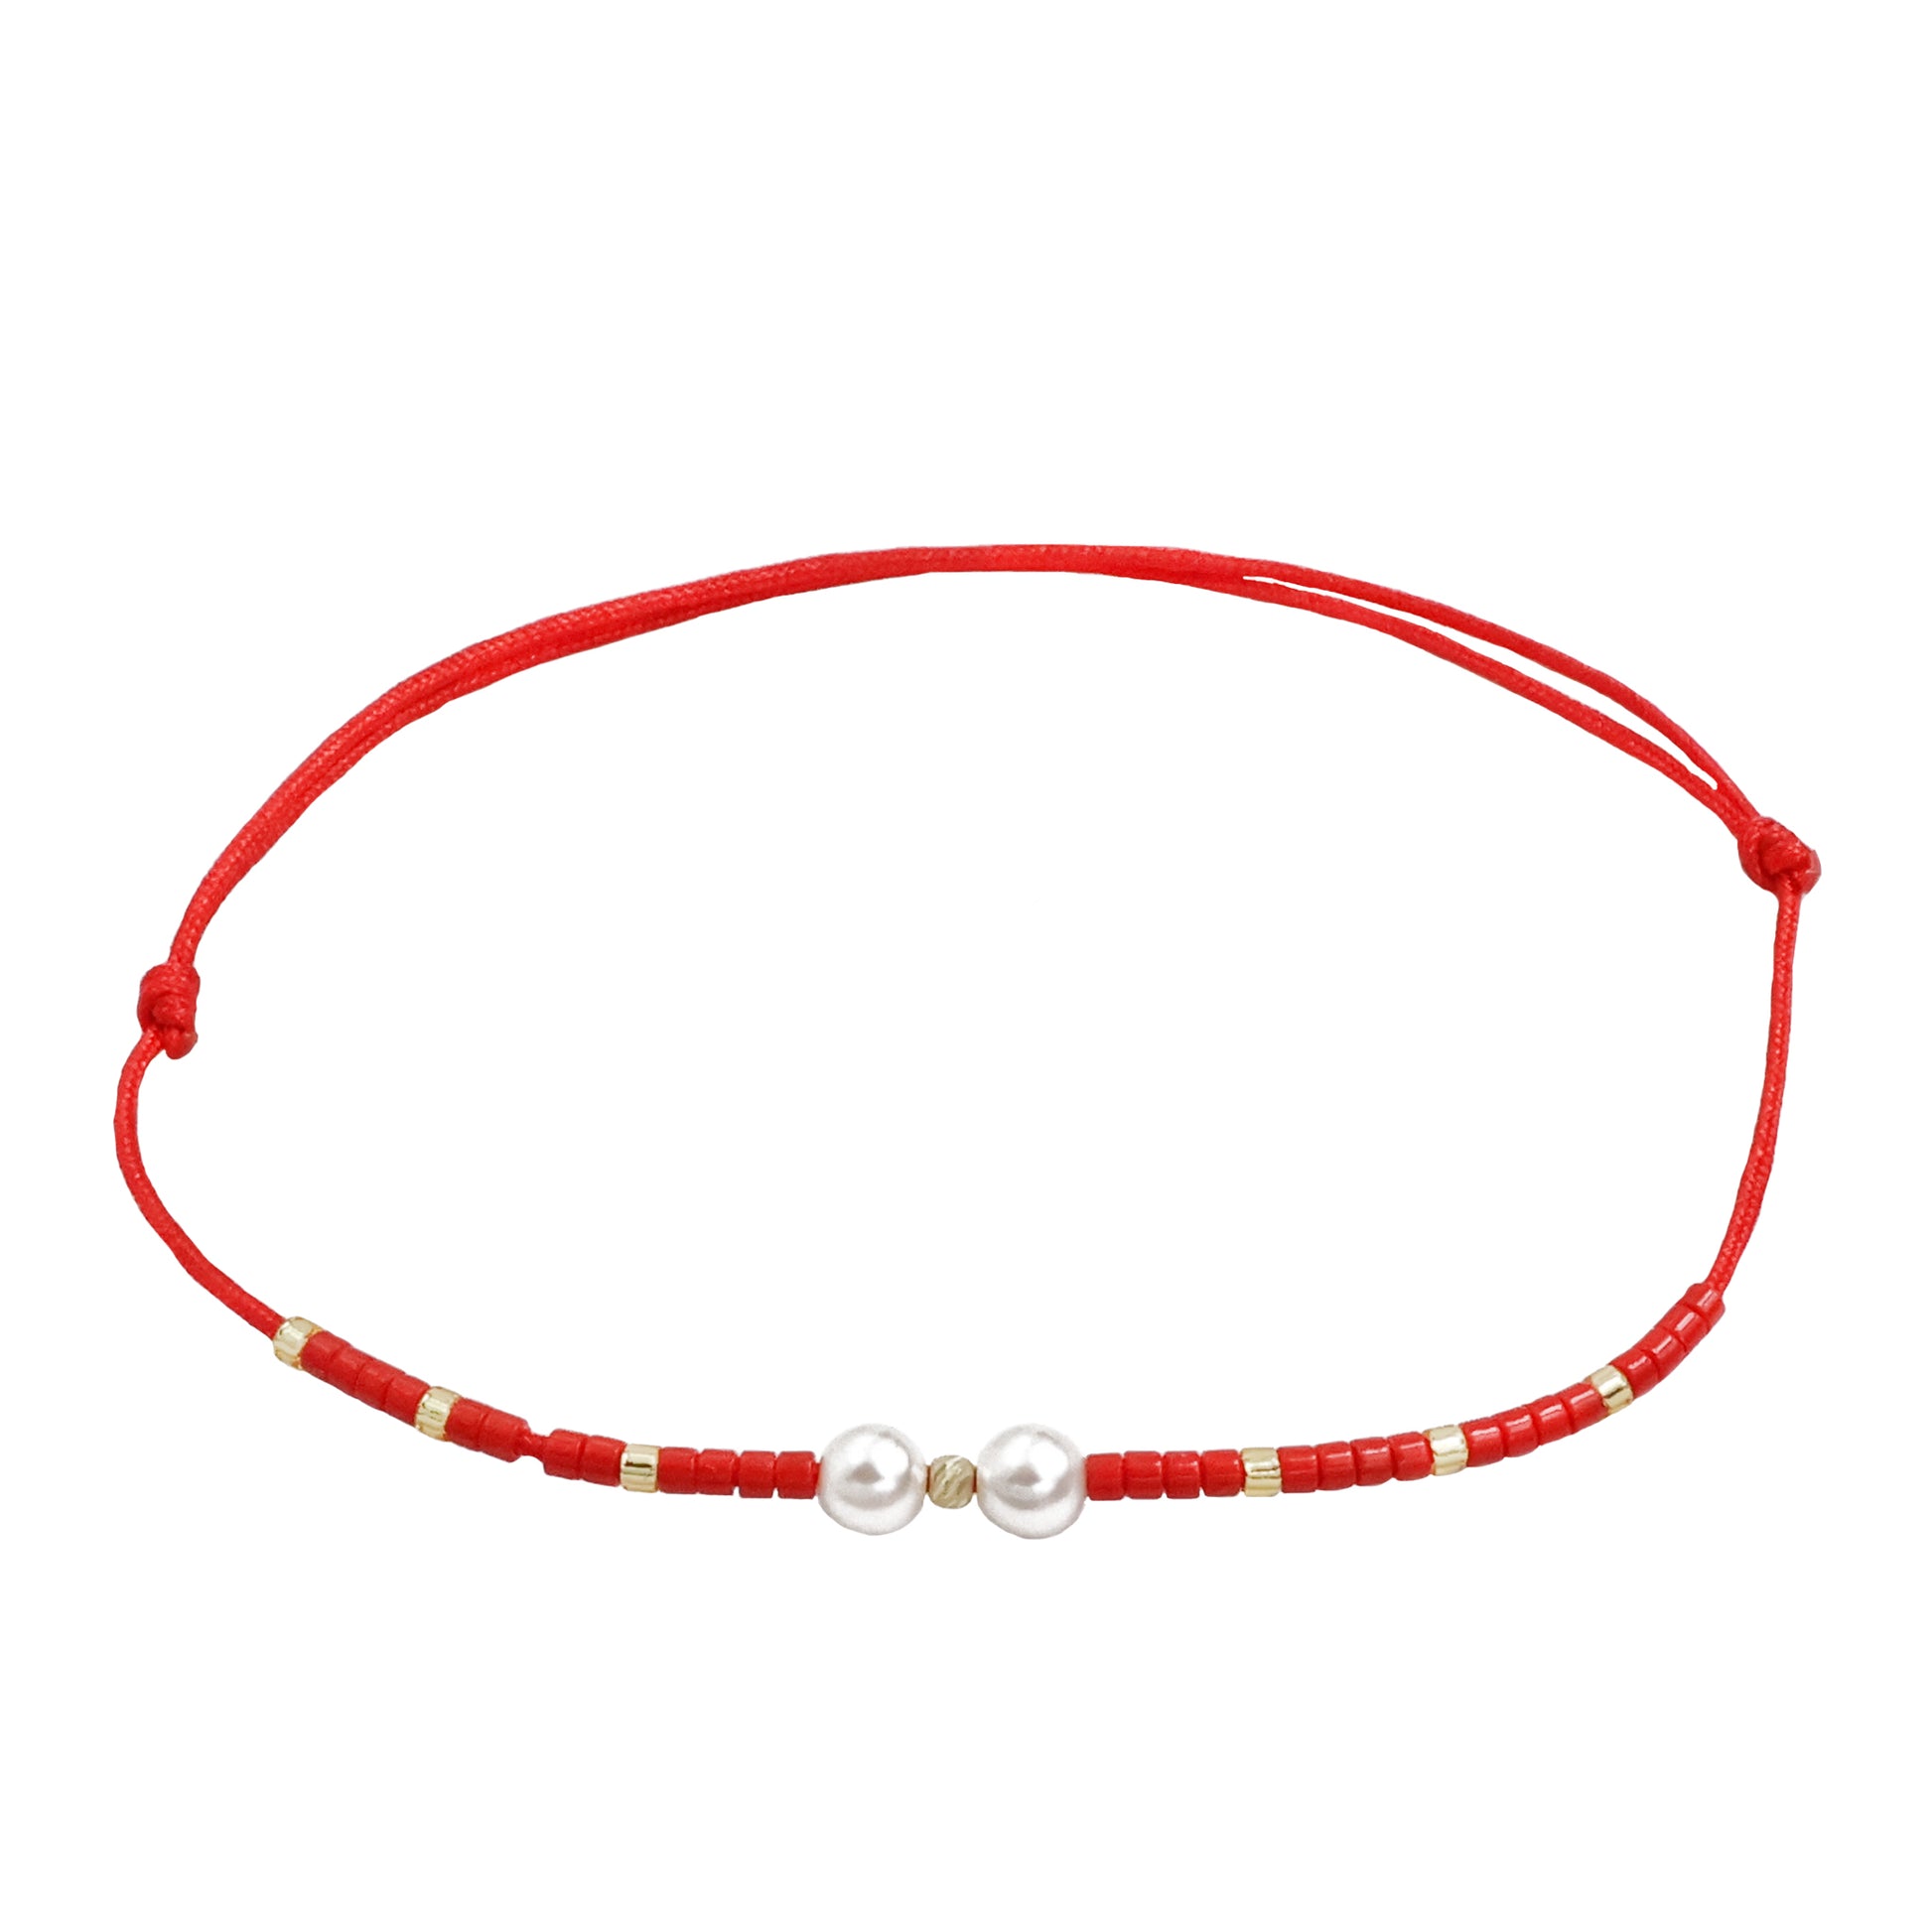 Bracelet with 1 bead of 14K solid gold, Miyuki beads and 2 artificial pearls-red Vega Lopez